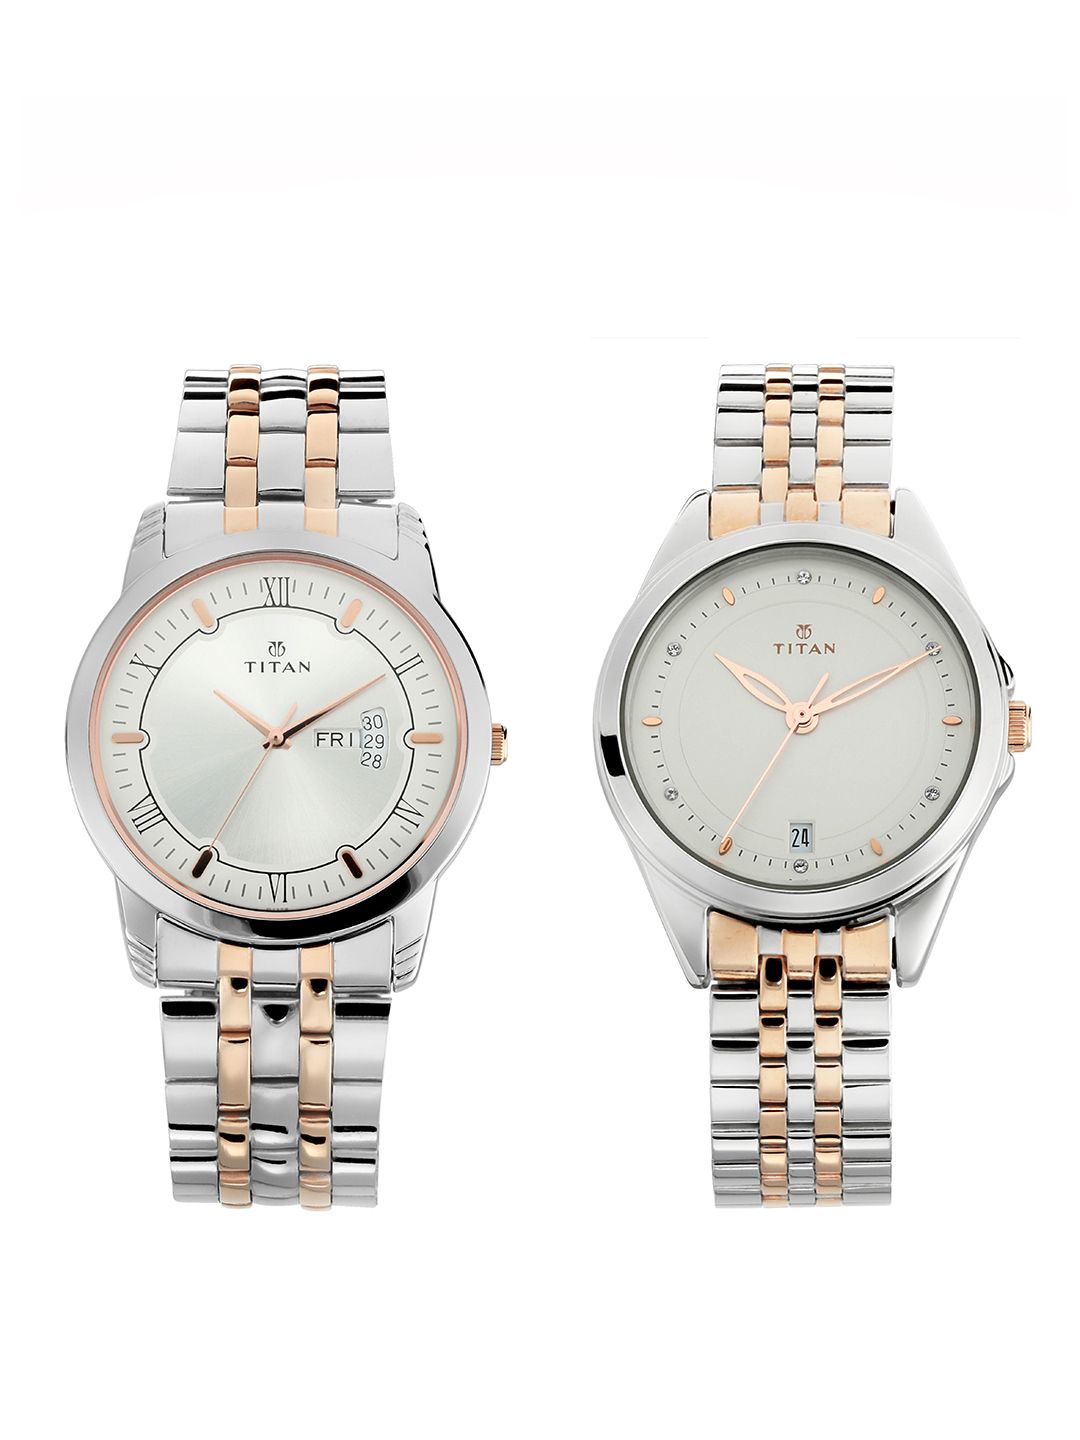 Titan His & Her Silver-Toned Analogue Watch NM17742565KM01 Price in India